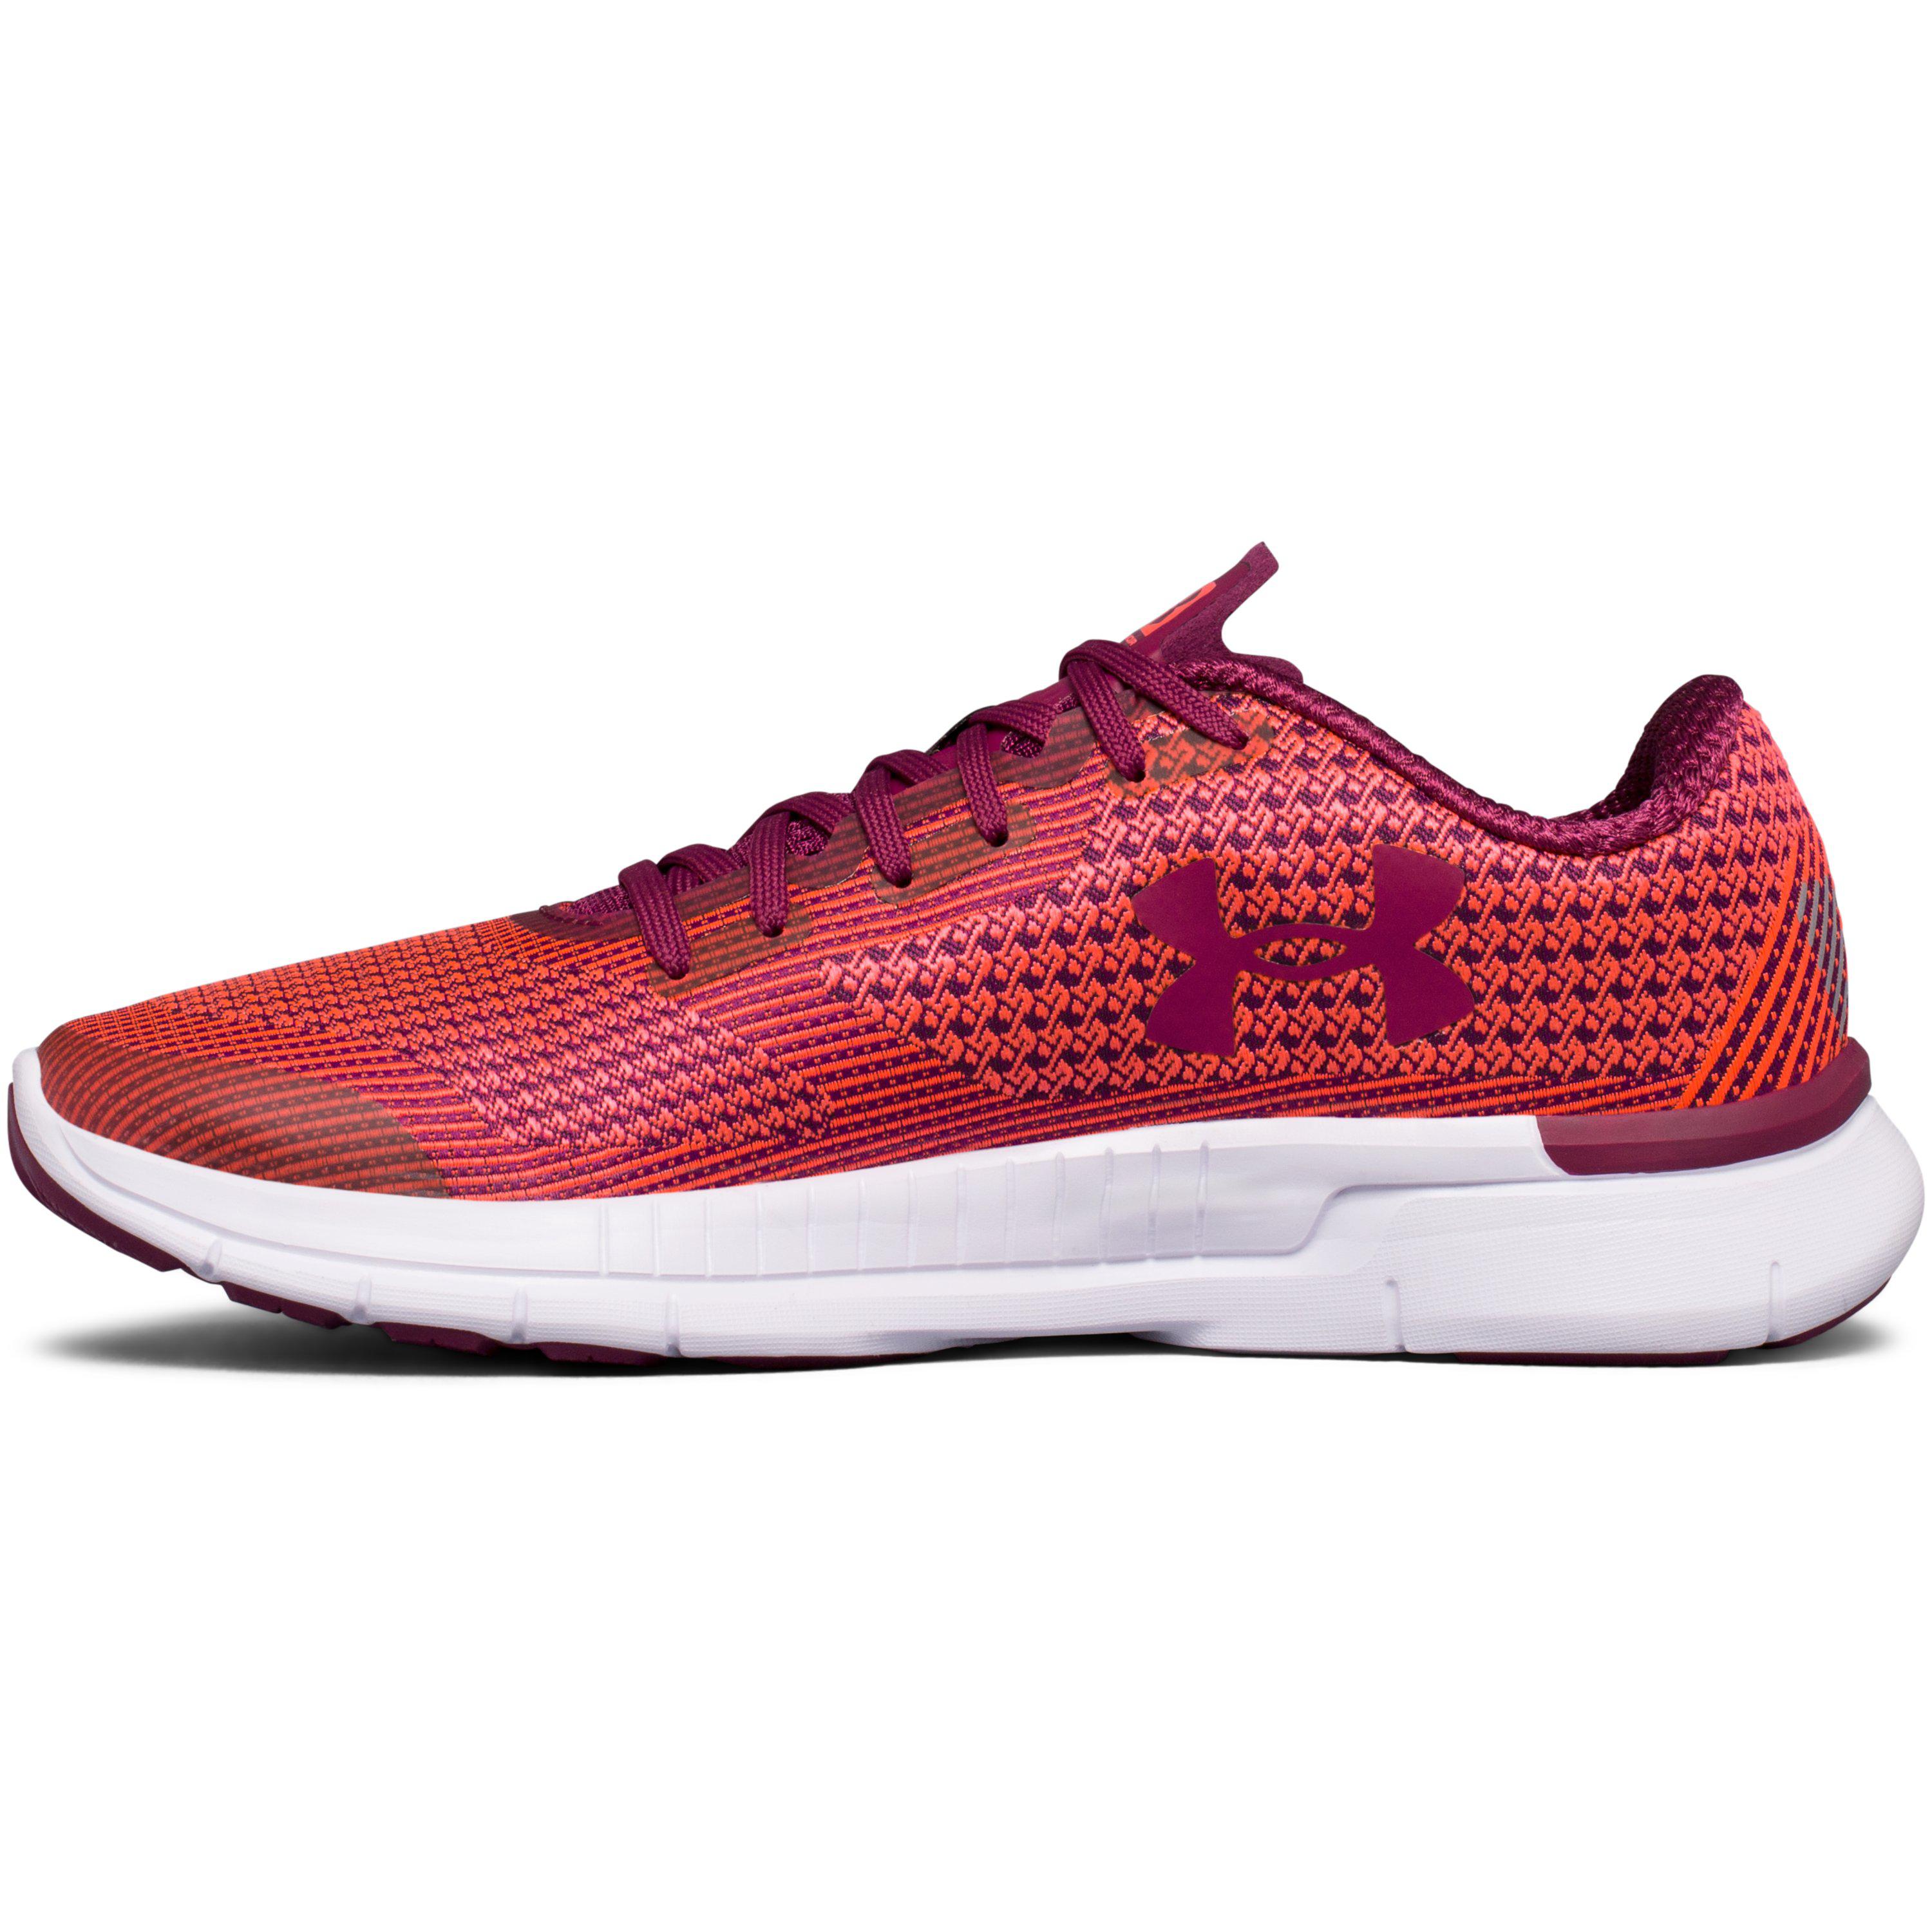 Under Armour Rubber Women's Ua Charged Lightning Running Shoes in Red ...